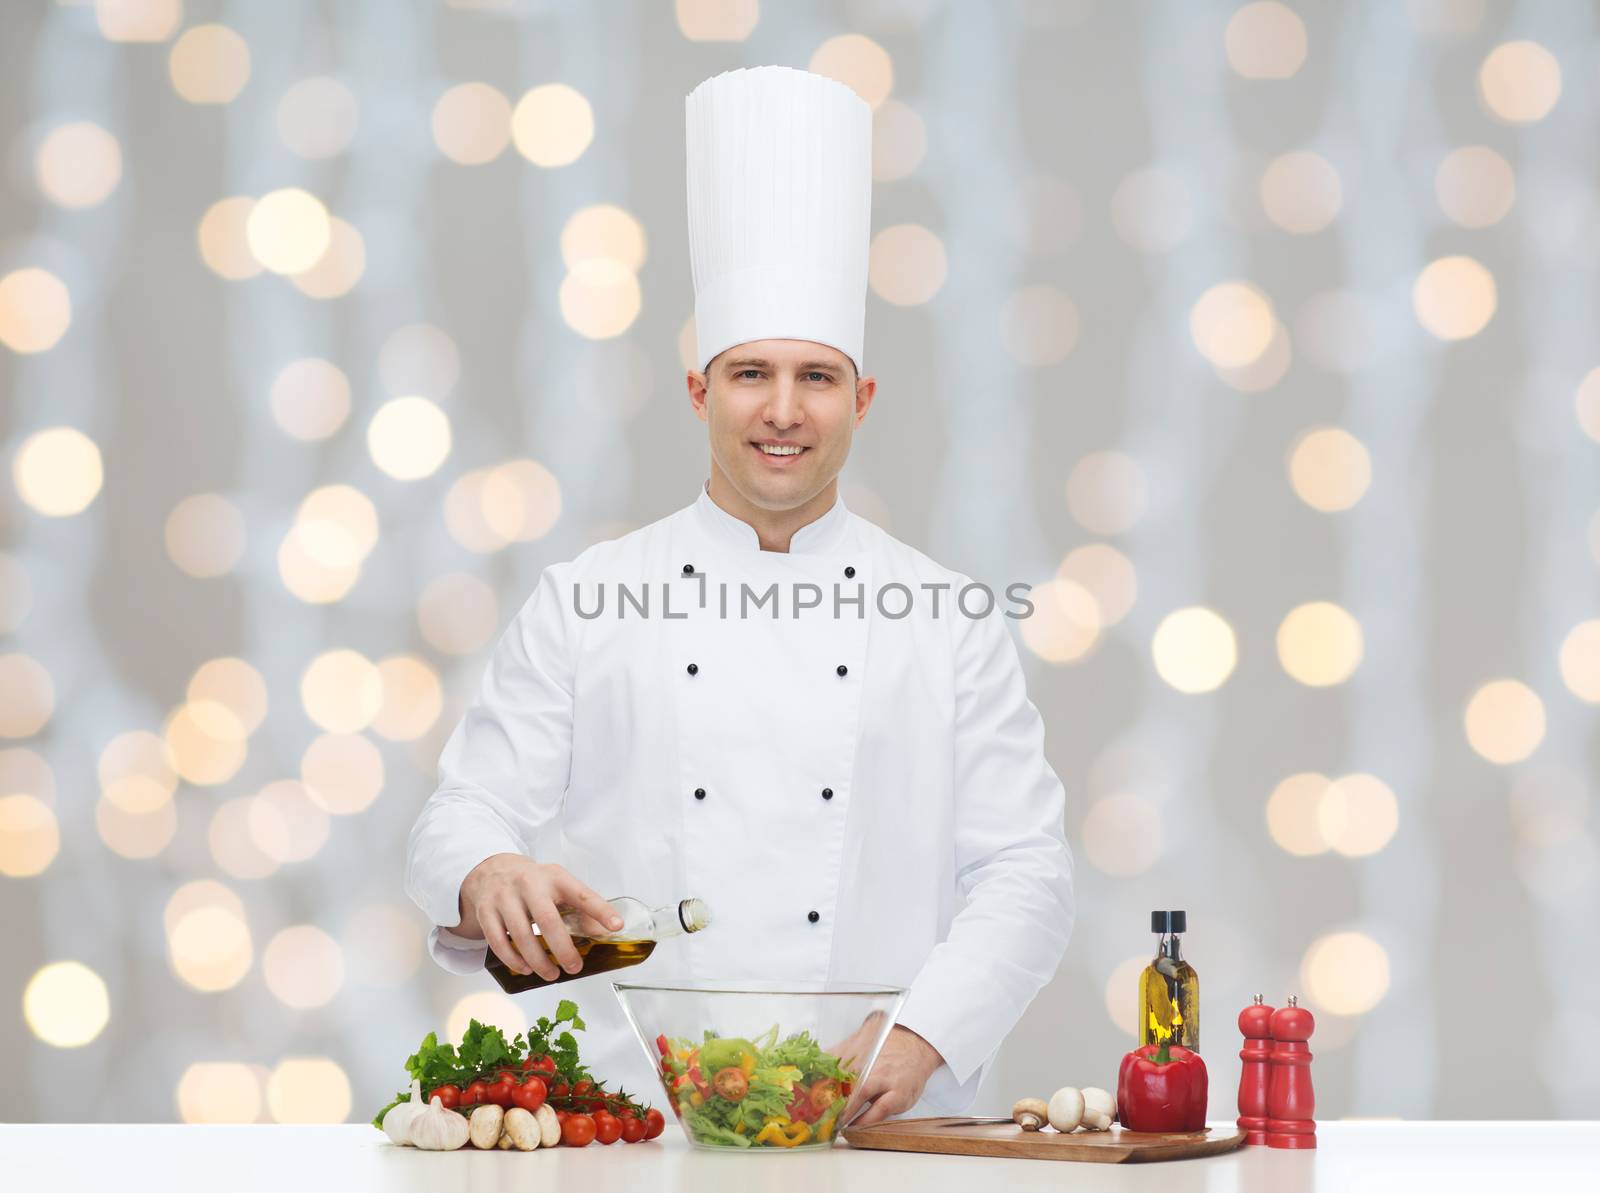 profession, vegetarian, food and people concept - happy male chef cooking vegetable salad over christmas holidays lights background